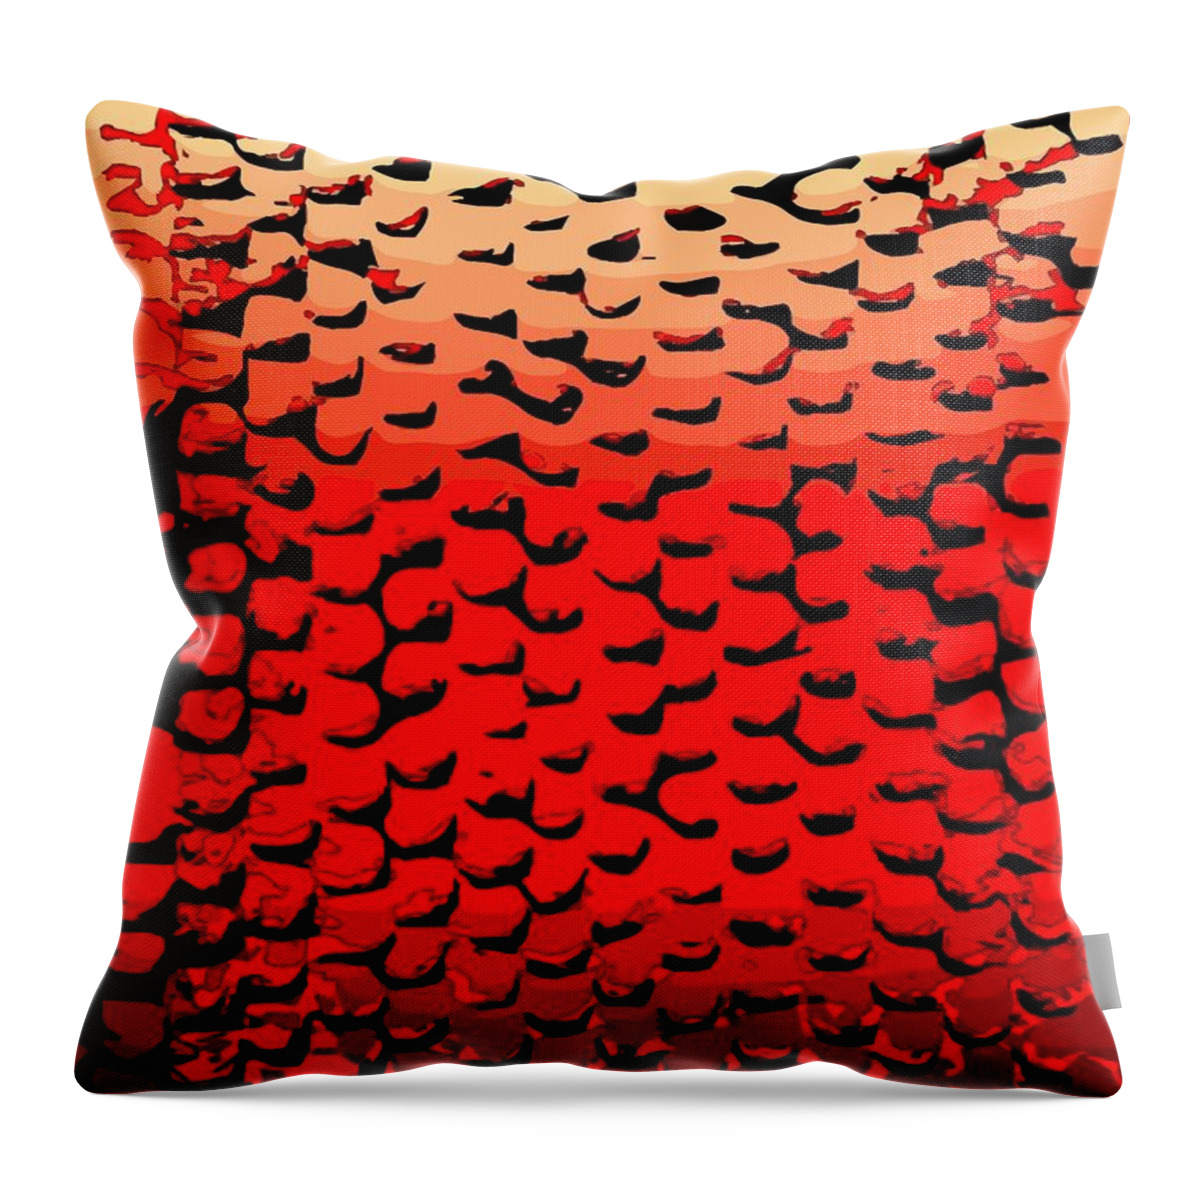 Digital Abstract Throw Pillow featuring the digital art Vibrational bricks by Neal Barbosa